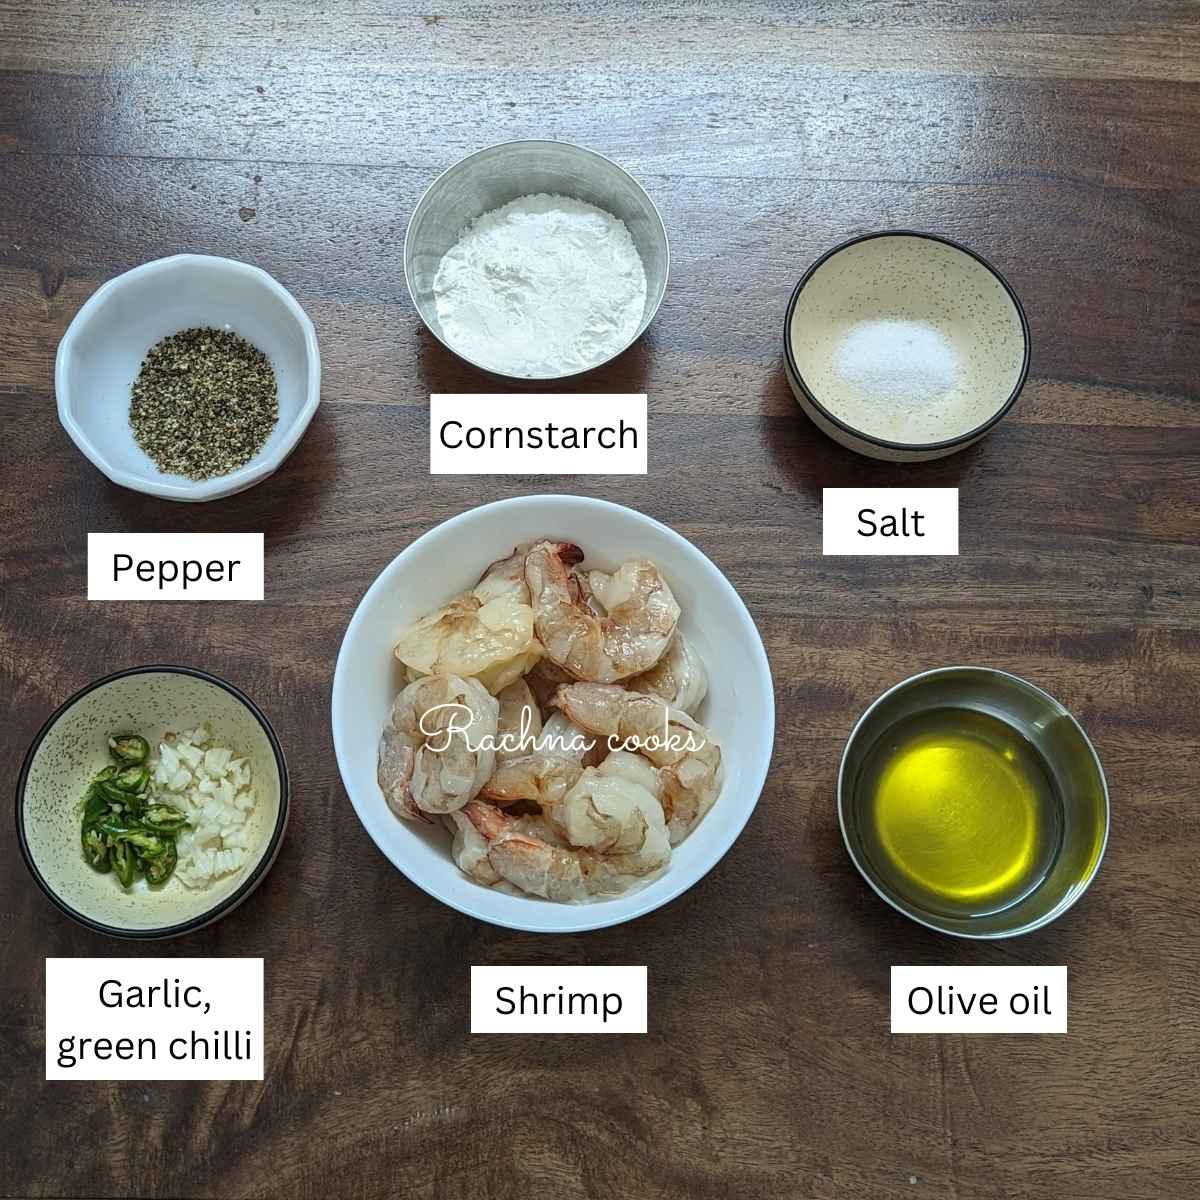 Ingredients for salt and pepper shrimp laid out